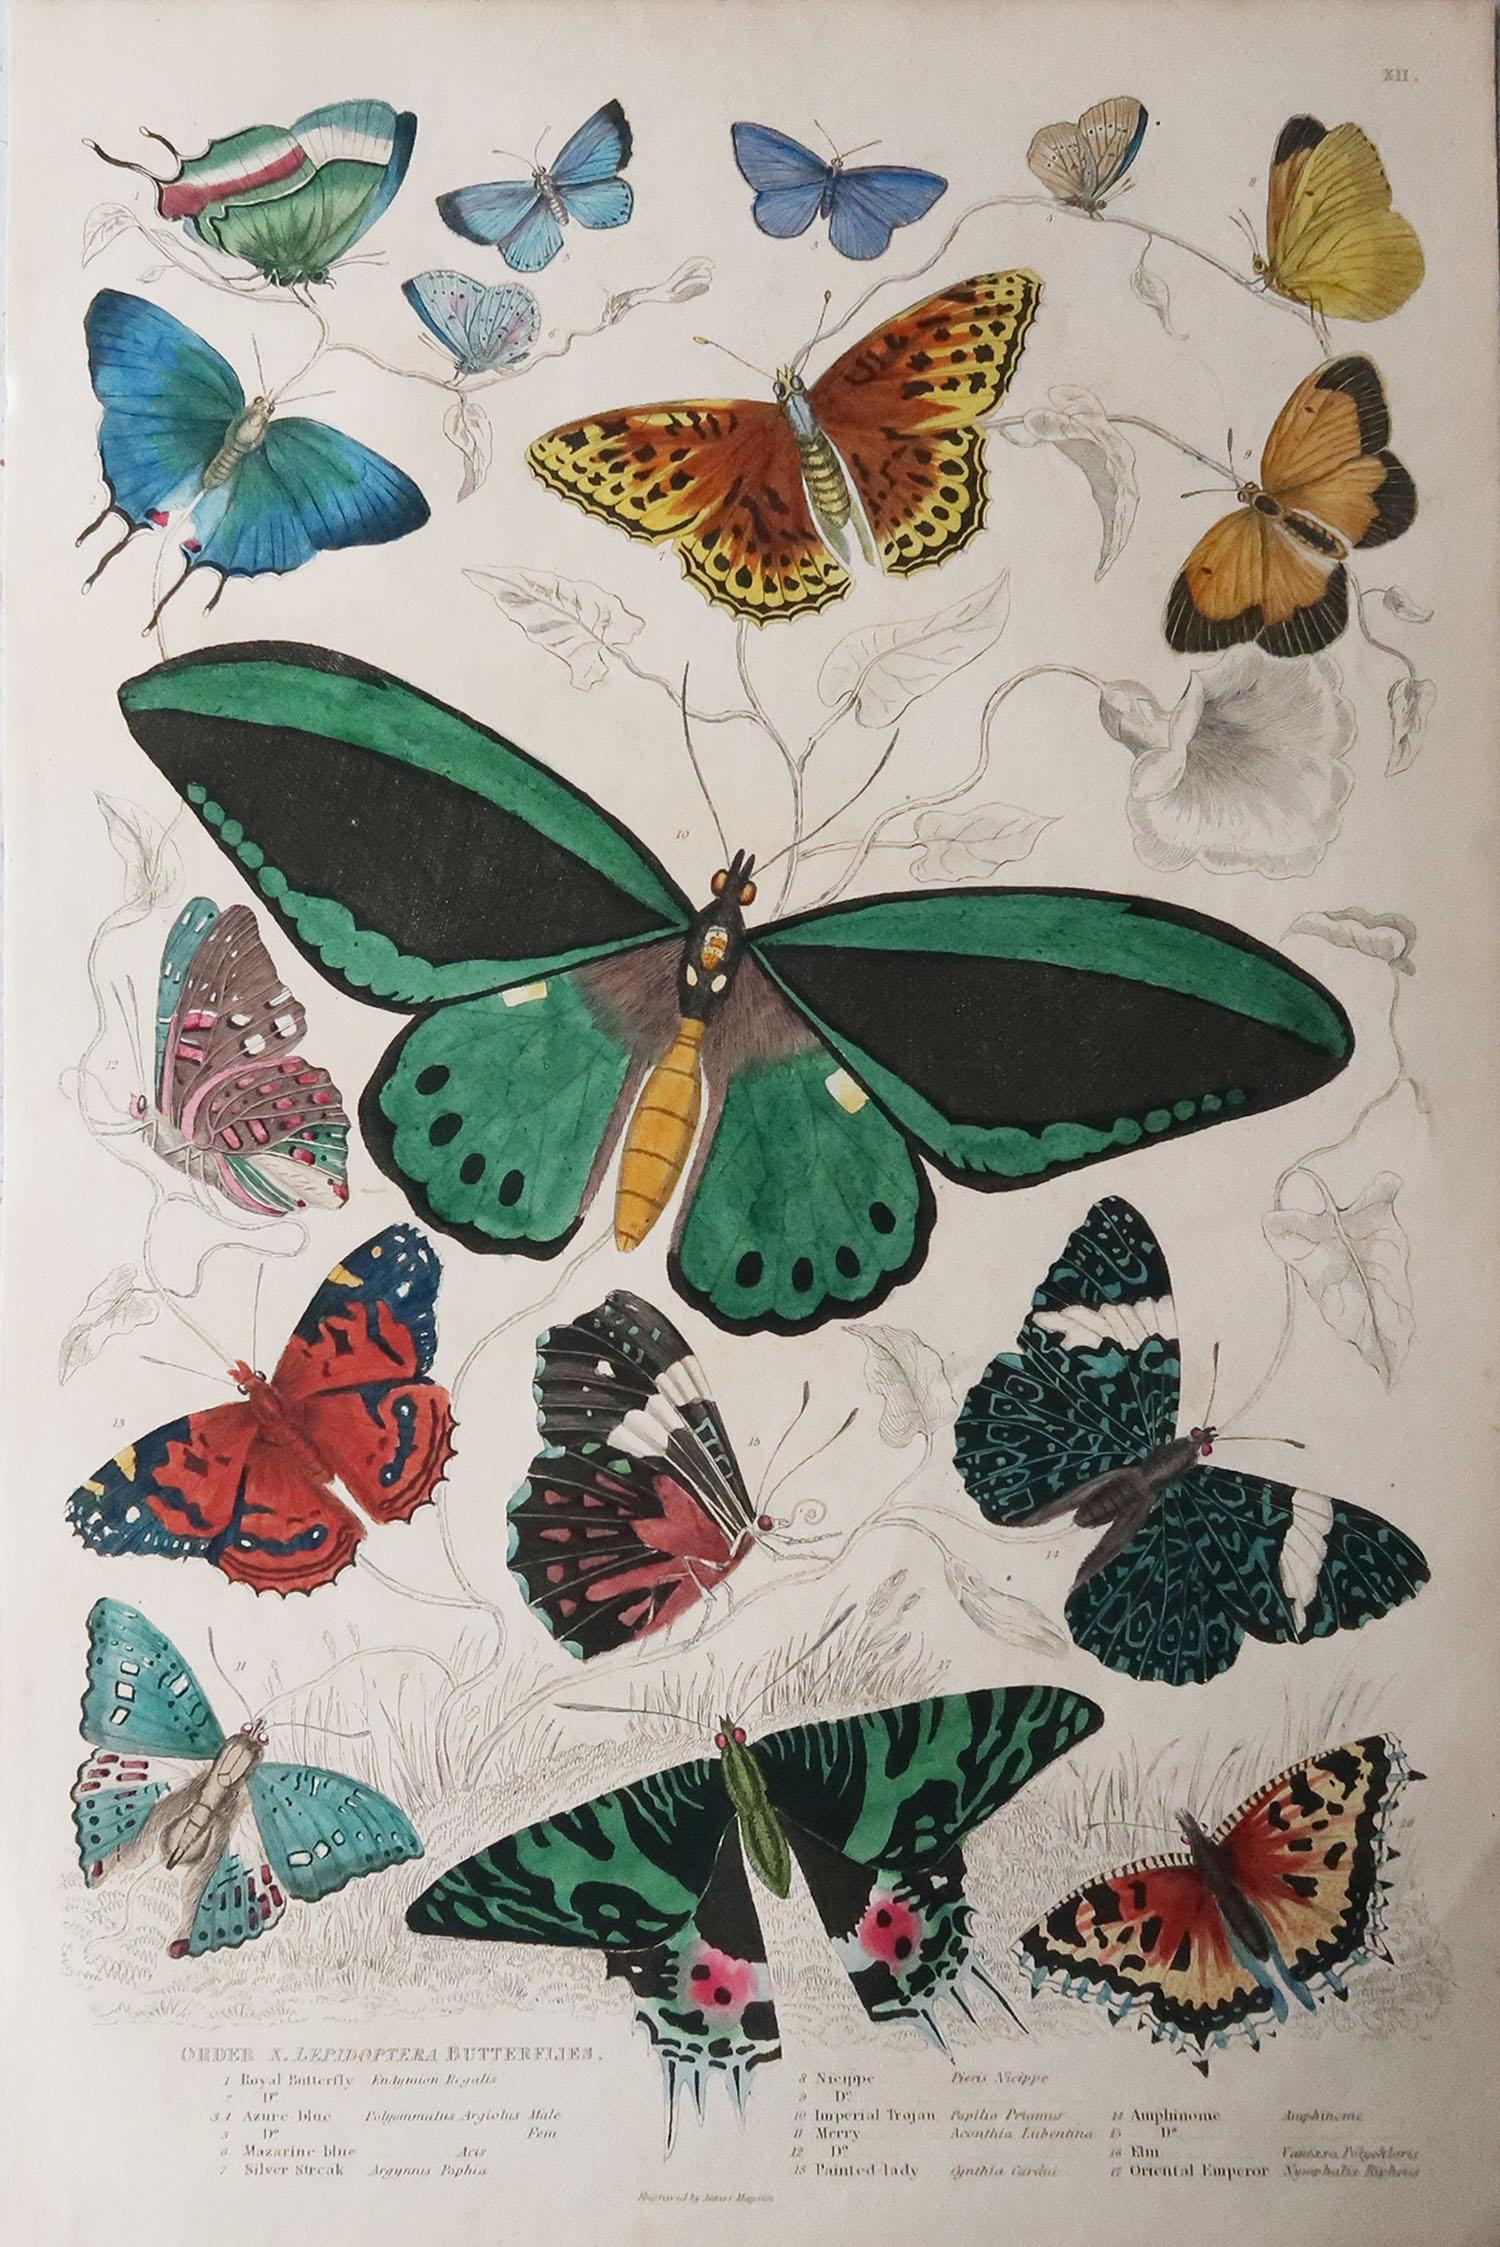 Great image of butterflies

Unframed. It gives you the option of perhaps making a set up using your own choice of frames.

Lithograph after Cpt. Brown, Gilpin and Edwards with original hand color.

Published circa 1835

Free